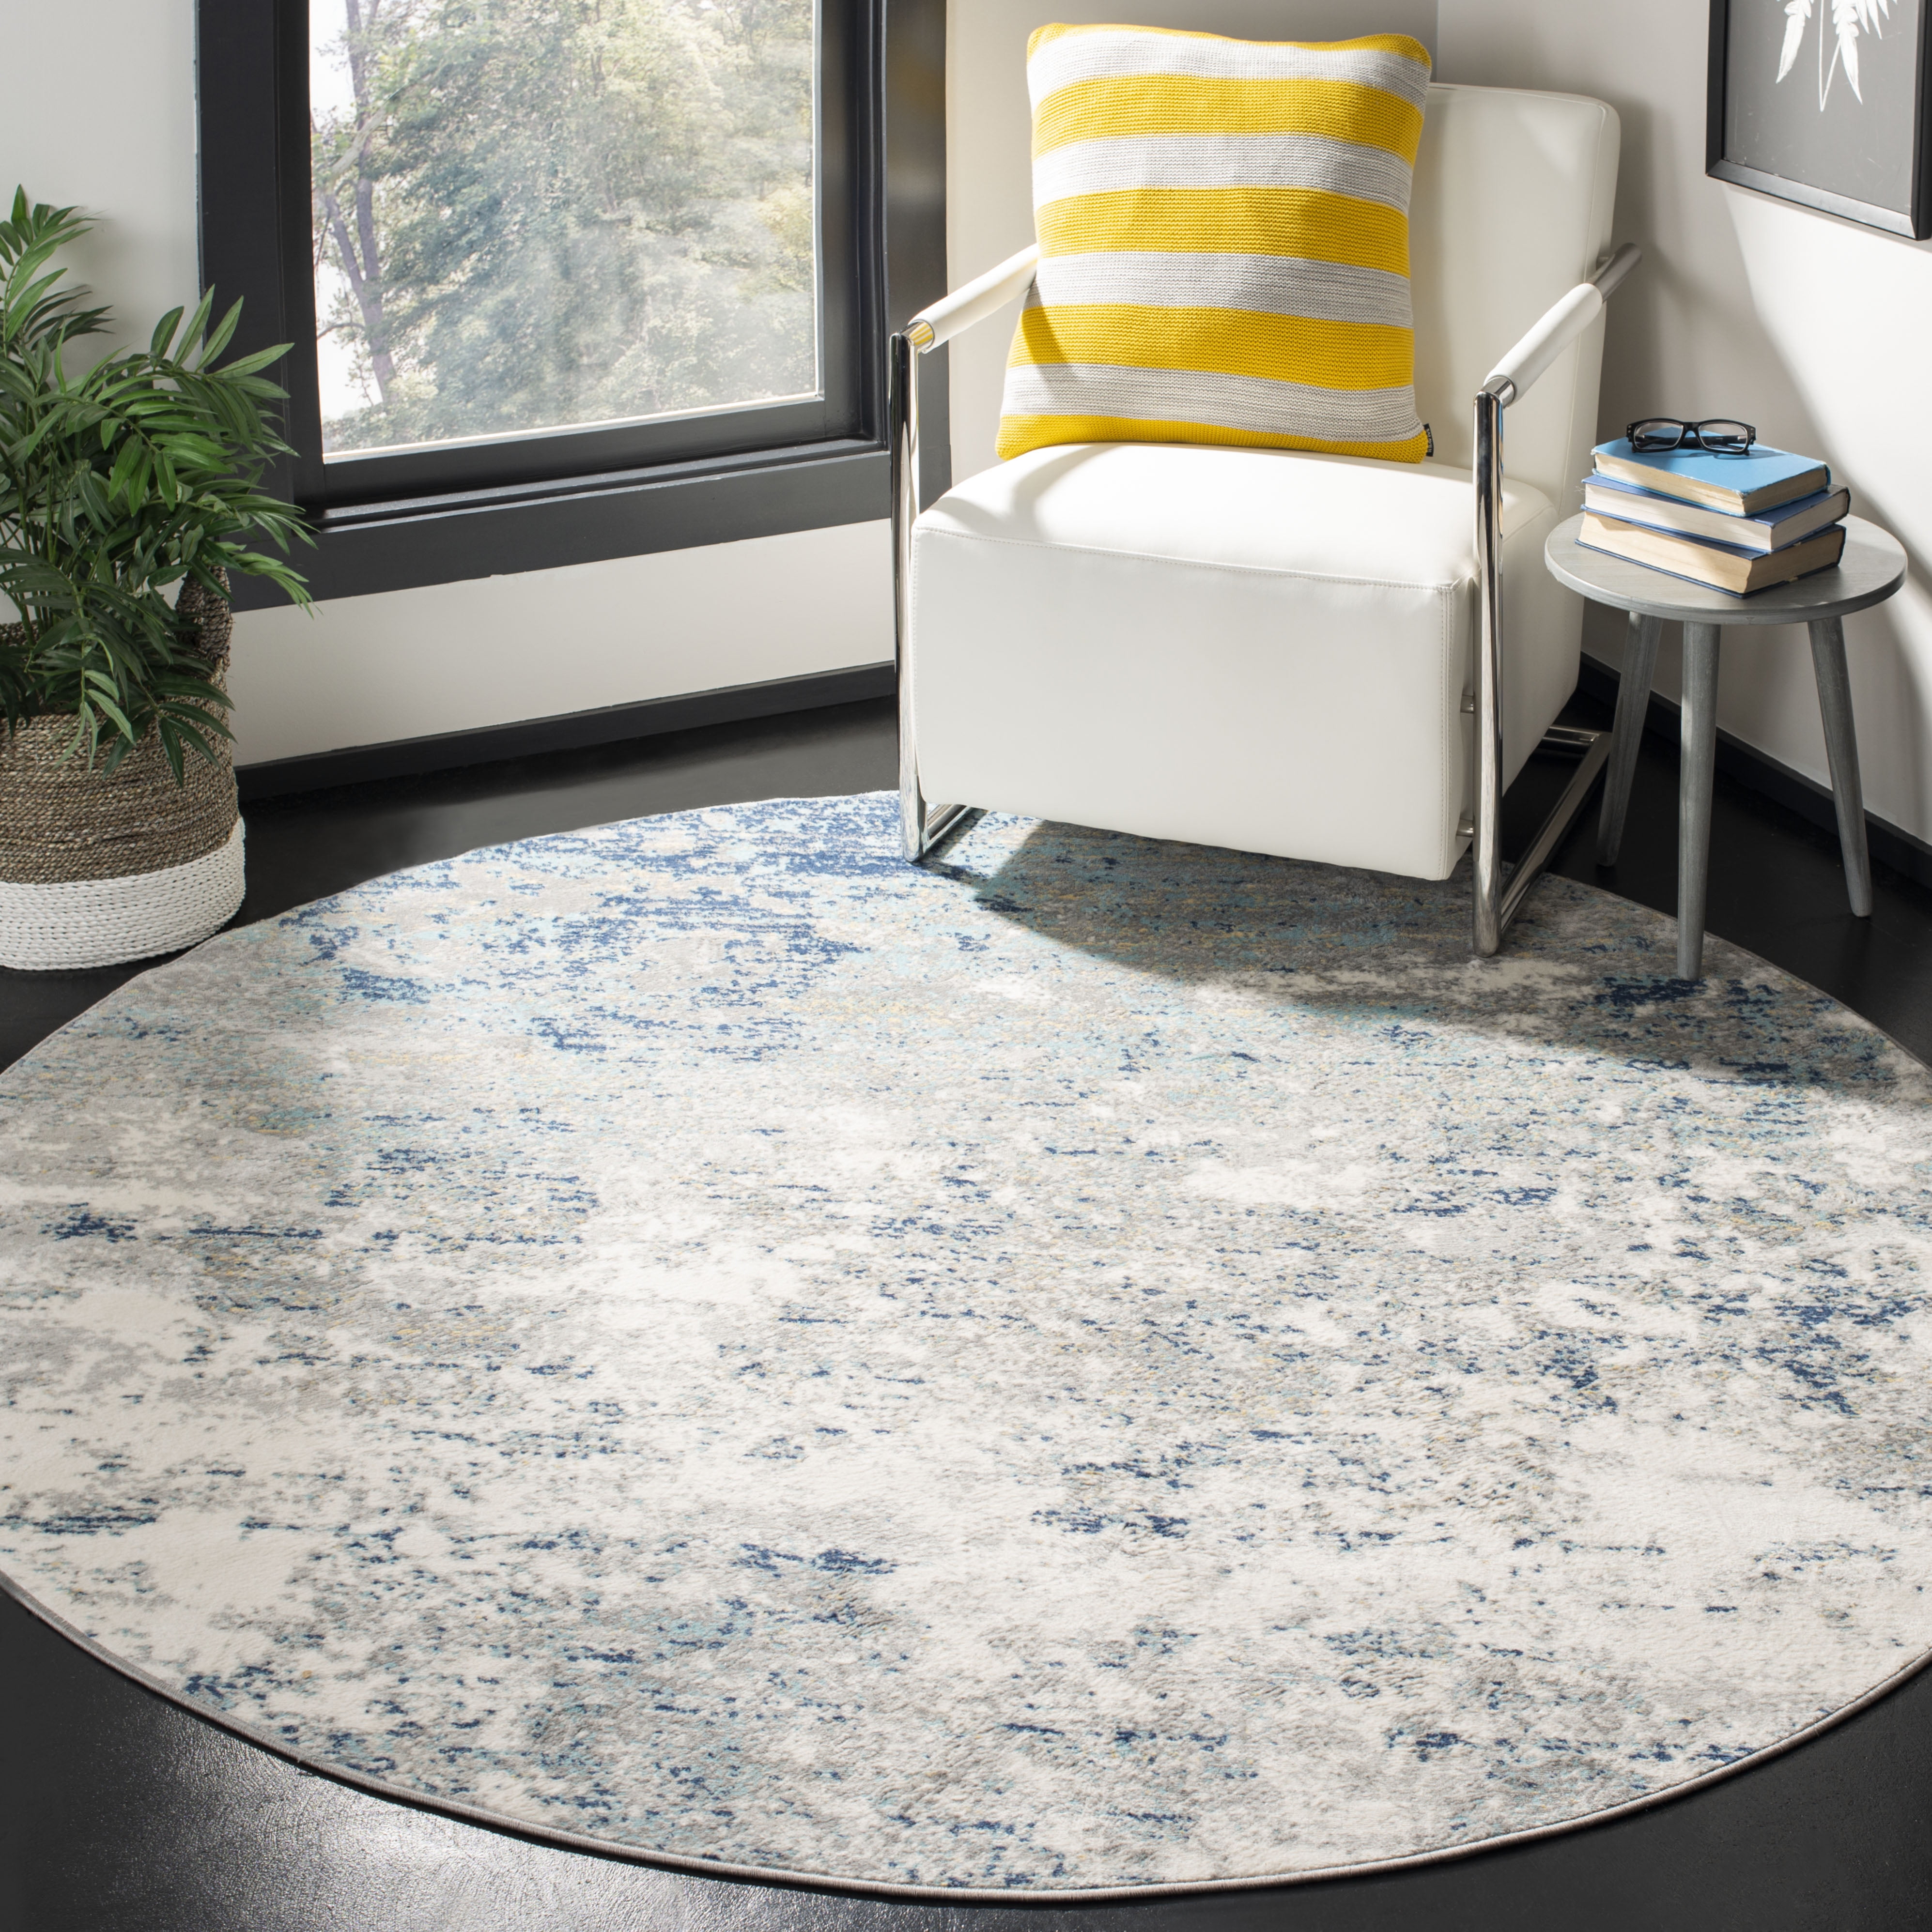 Abstract Blue Particle Round Floor Mat Rug Bedroom Carpet Living Room Area Rugs 